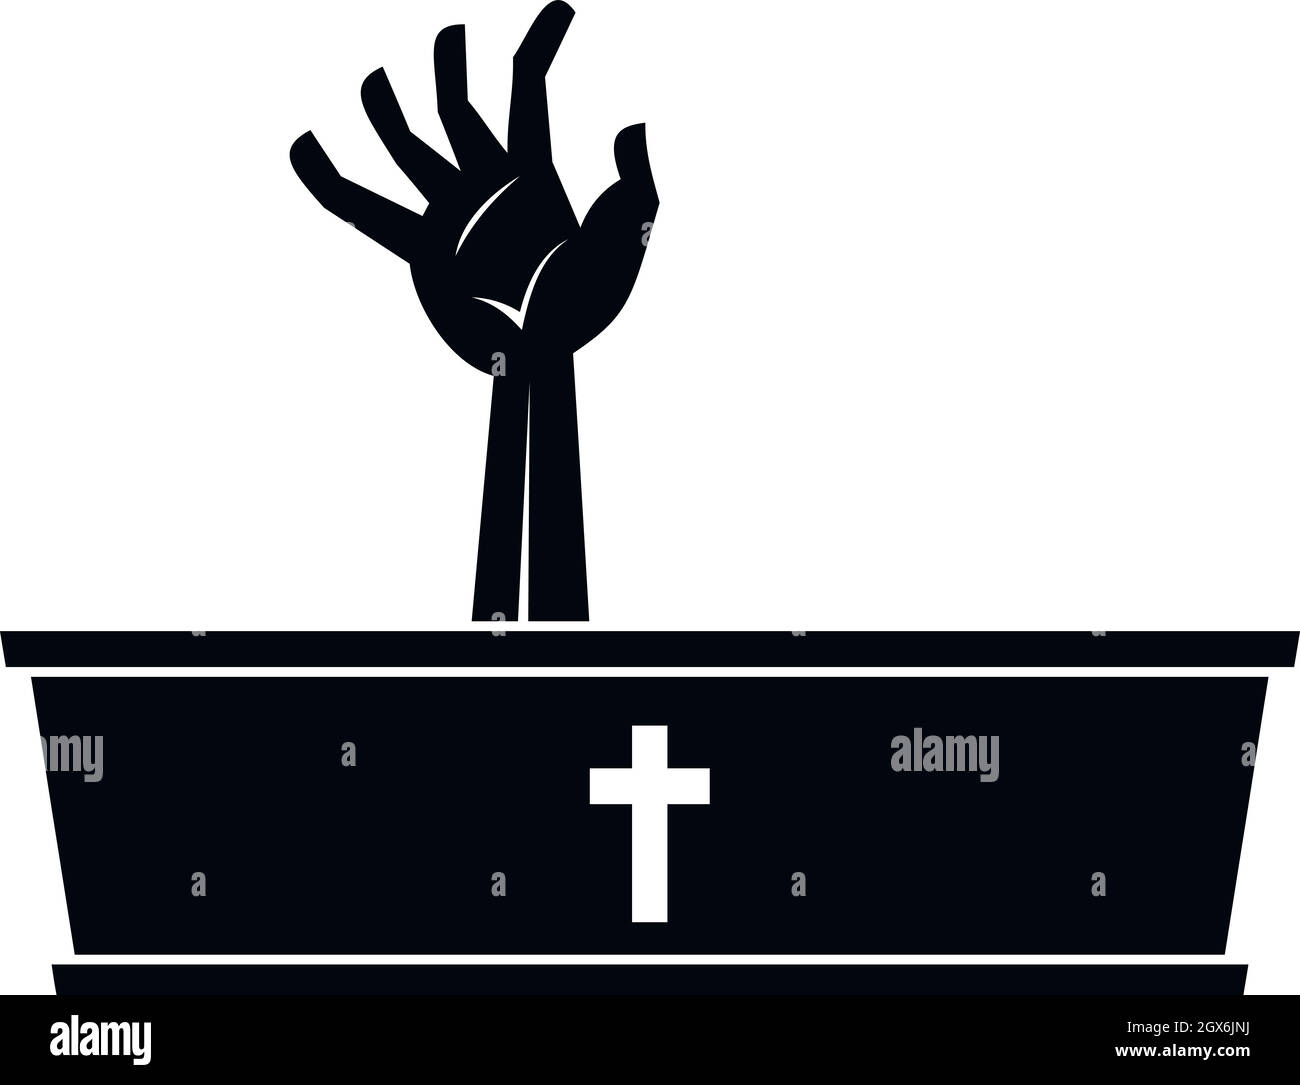 Zombie hand coming out of his coffin icon Stock Vector